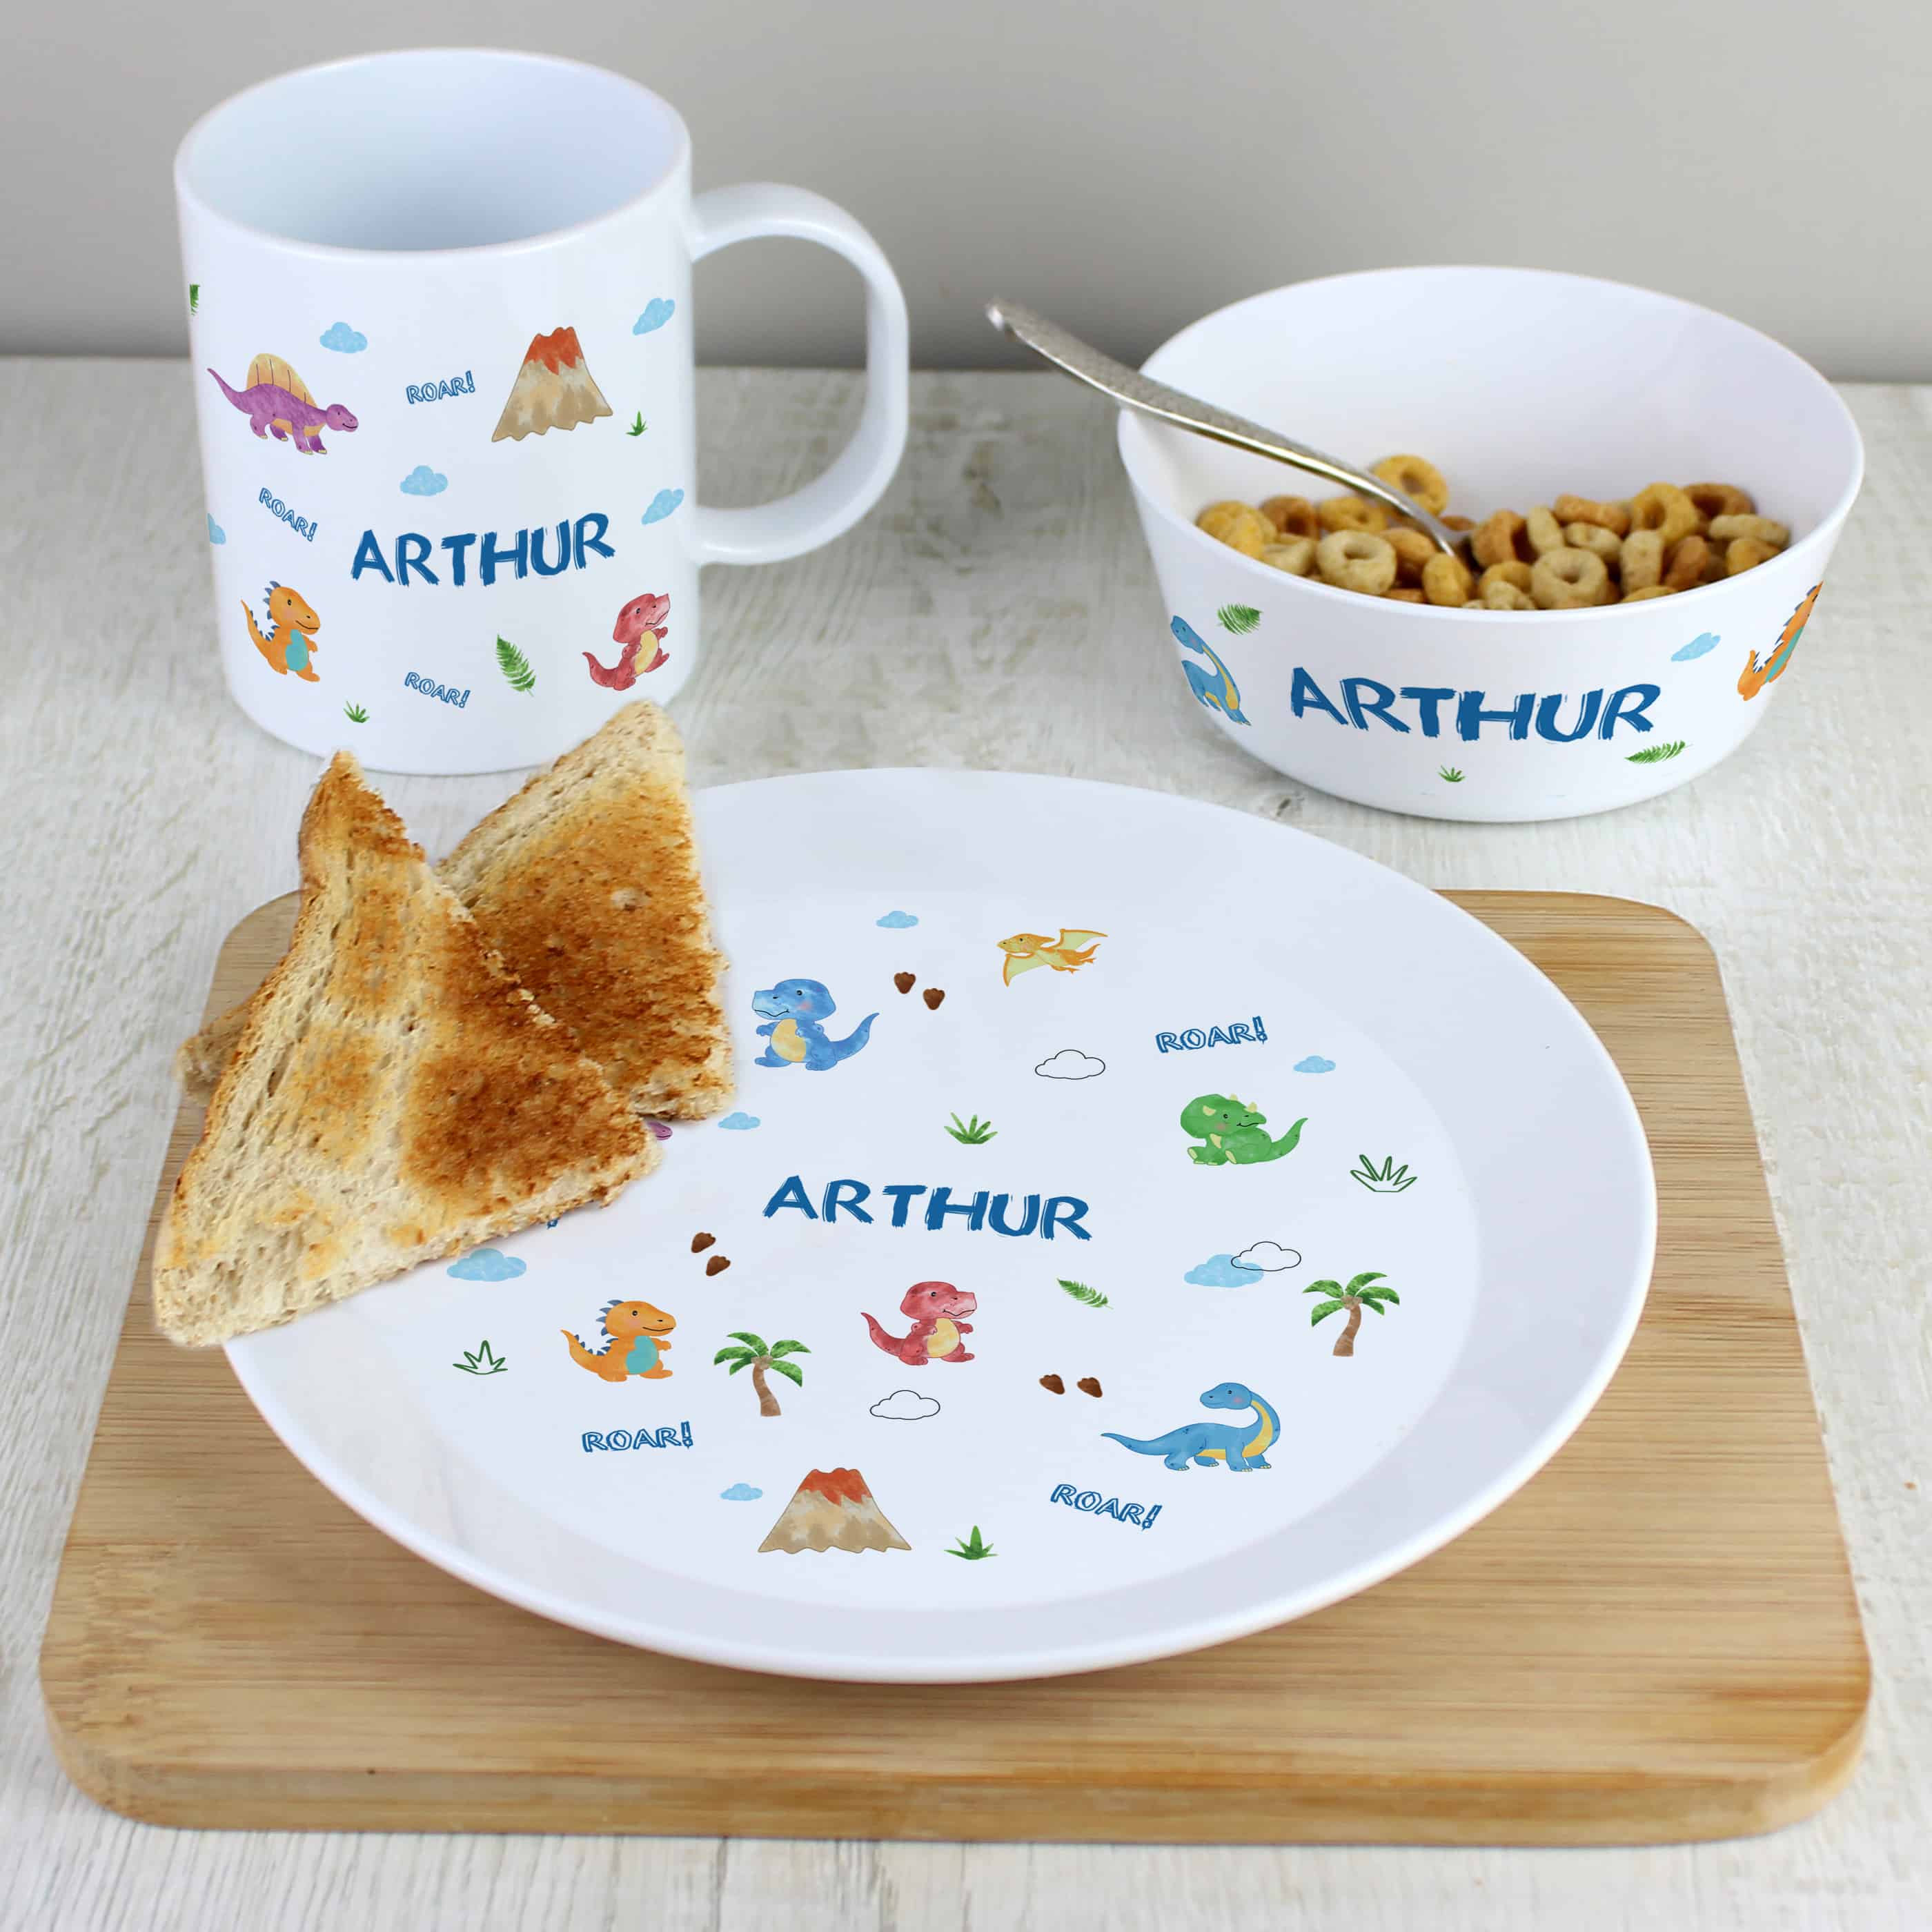 personalised breakfast set includes plate, bowl and mug